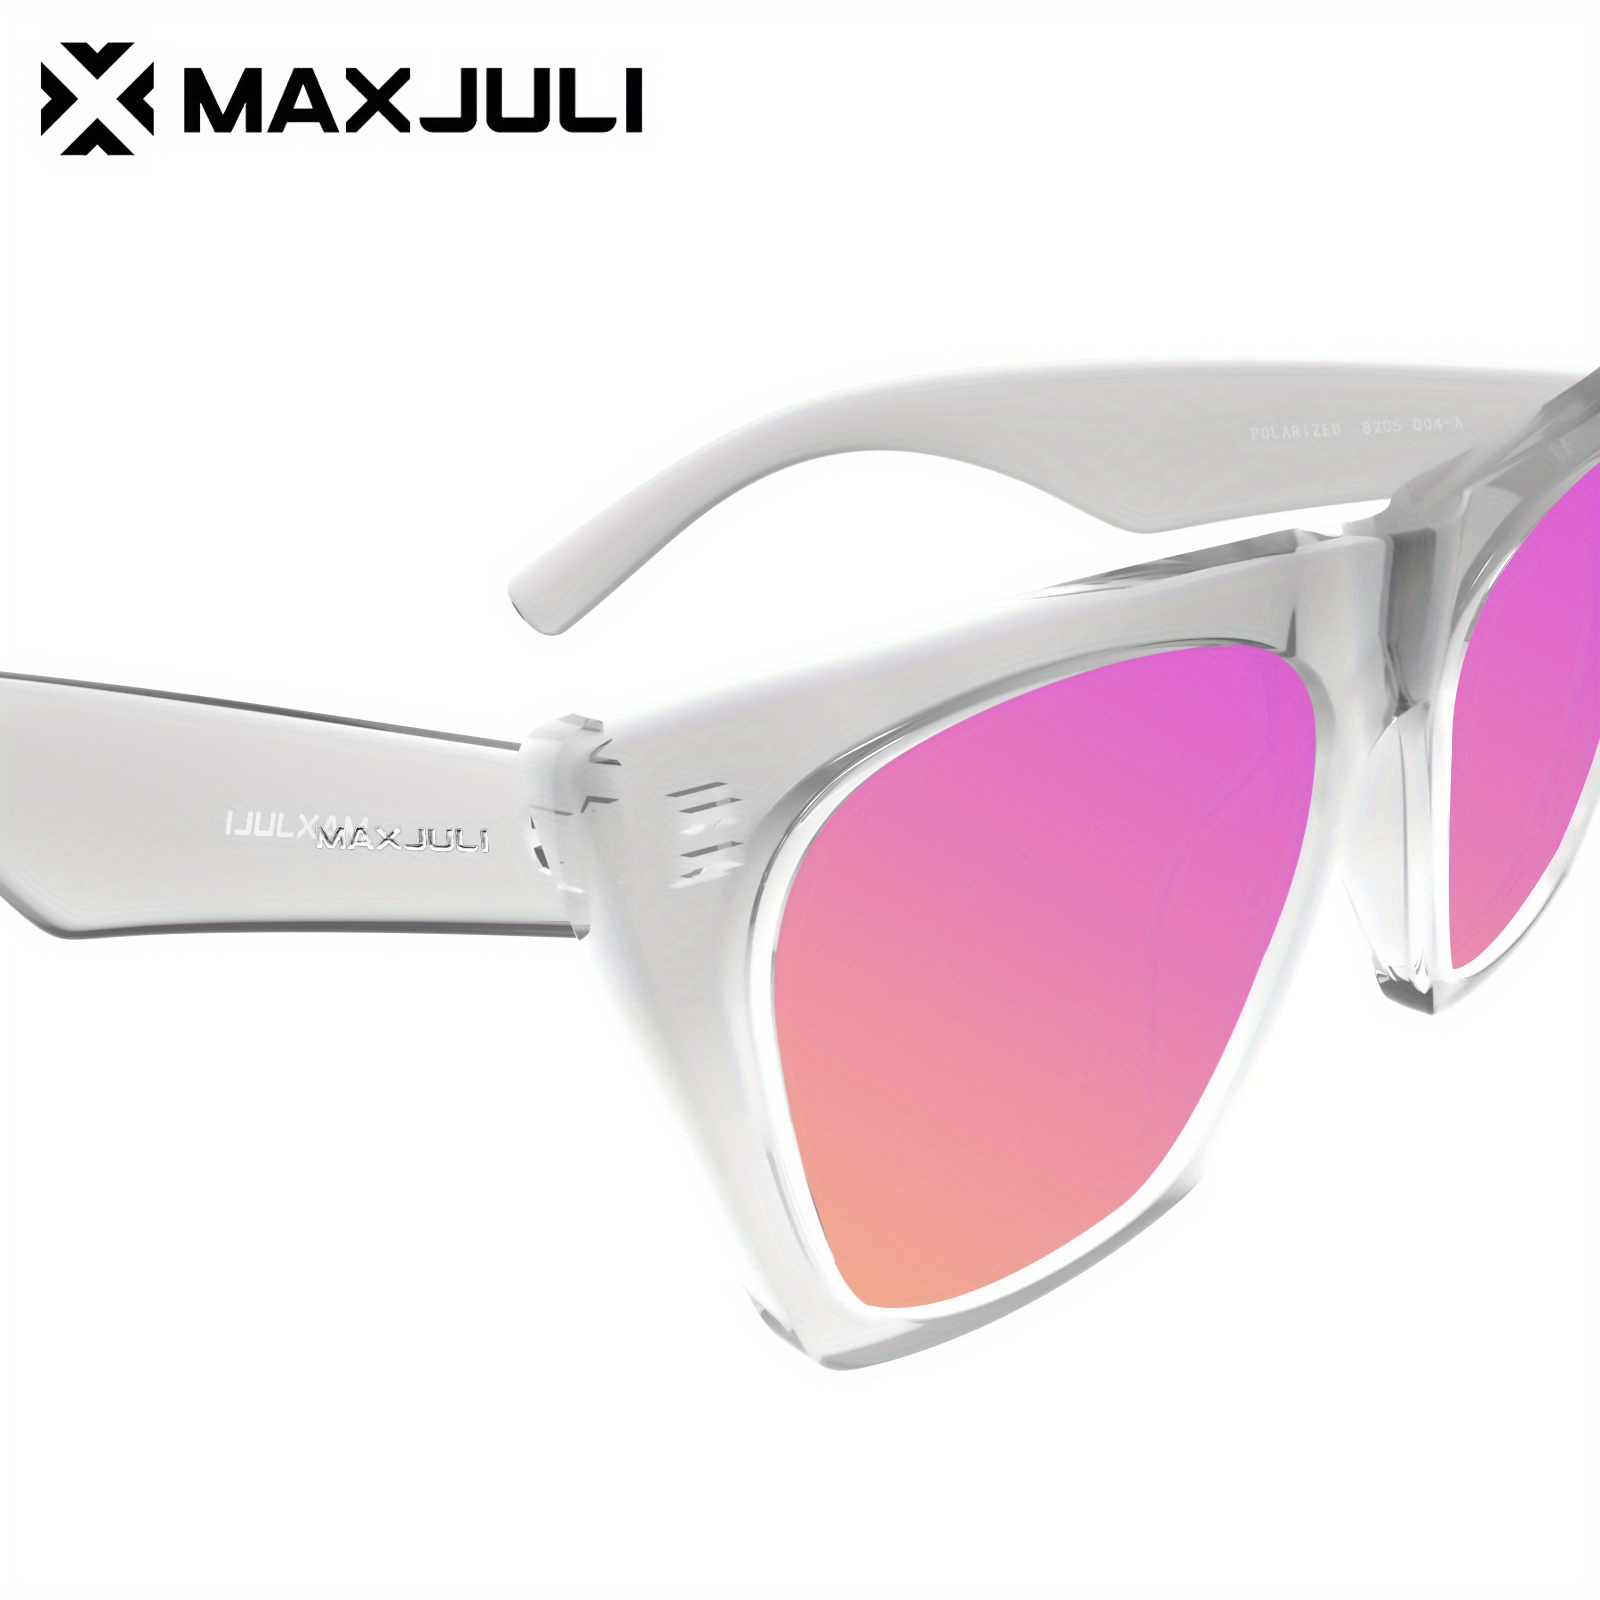 MAXJULI XL Size Extra Large Polarized Sunglasses, 141MM/5.55inch for Big Wide Heads Men, Ultralight UV400 Protection Glasses 8205, Our Sunglasses